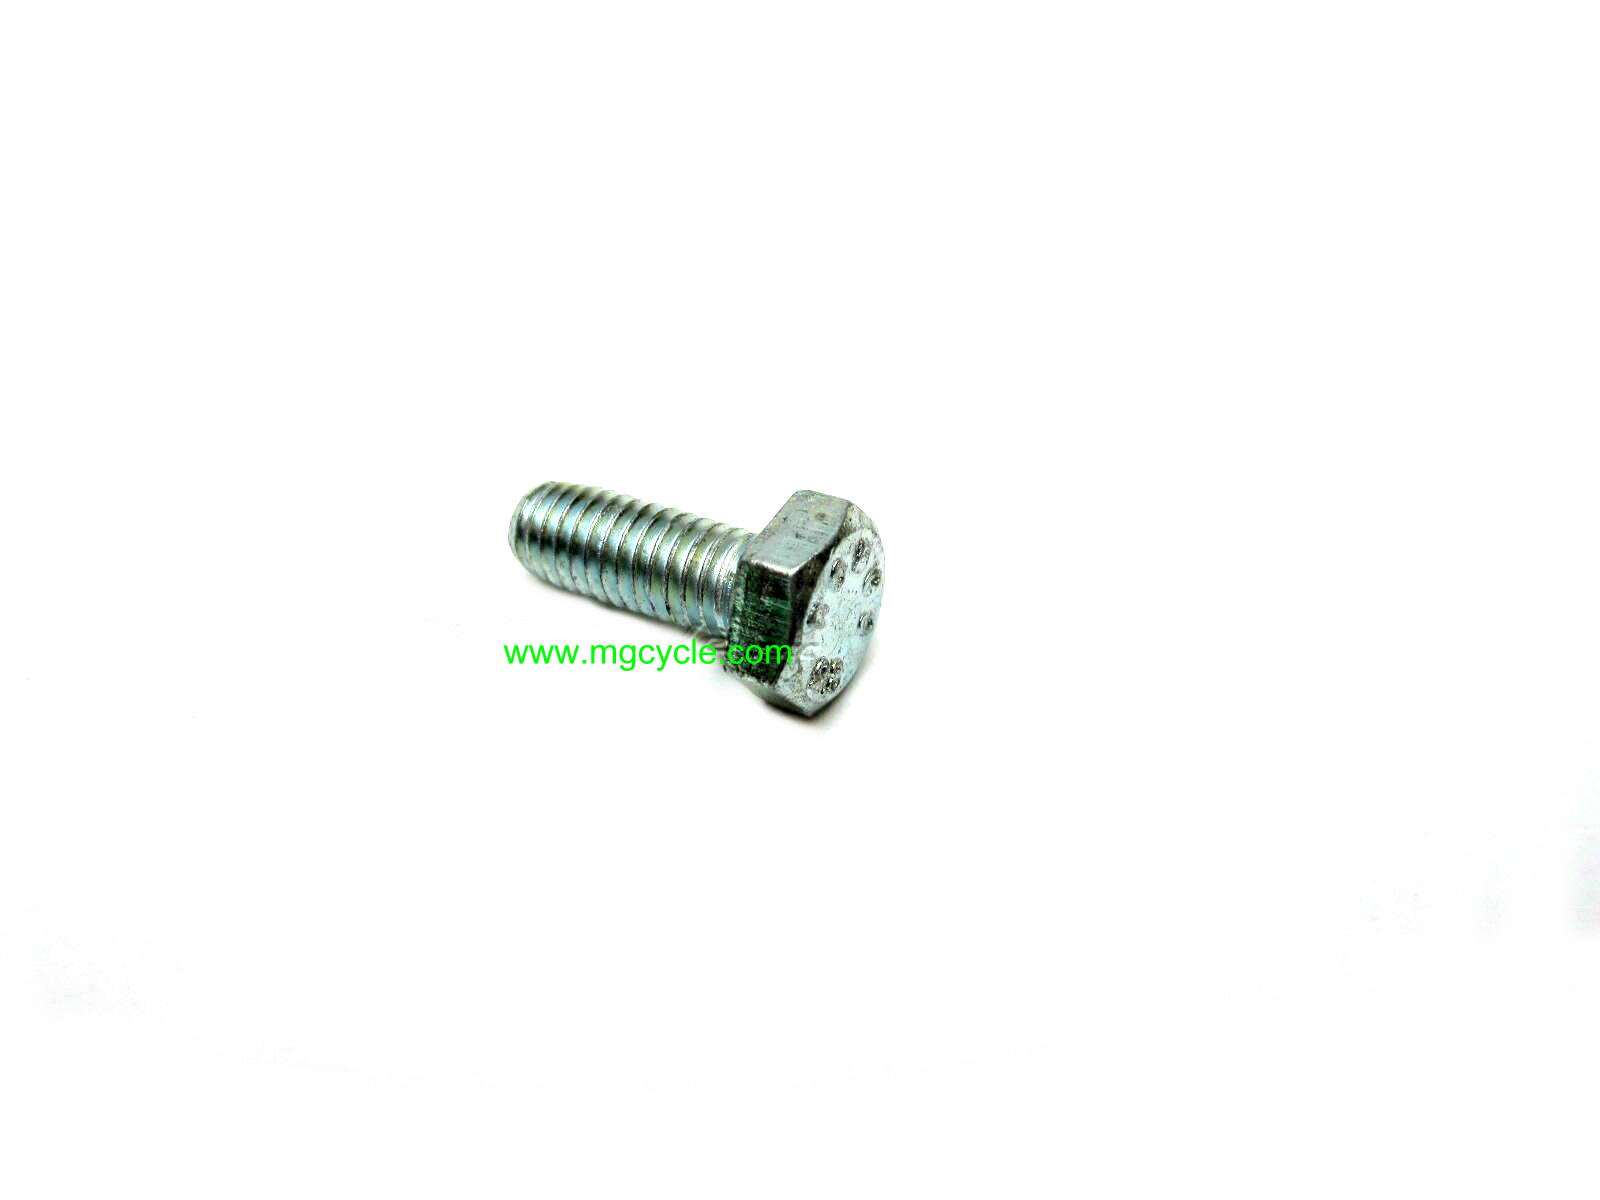 6mm hex bolt, rocker arm, generator pulley, 98084316 - Click Image to Close